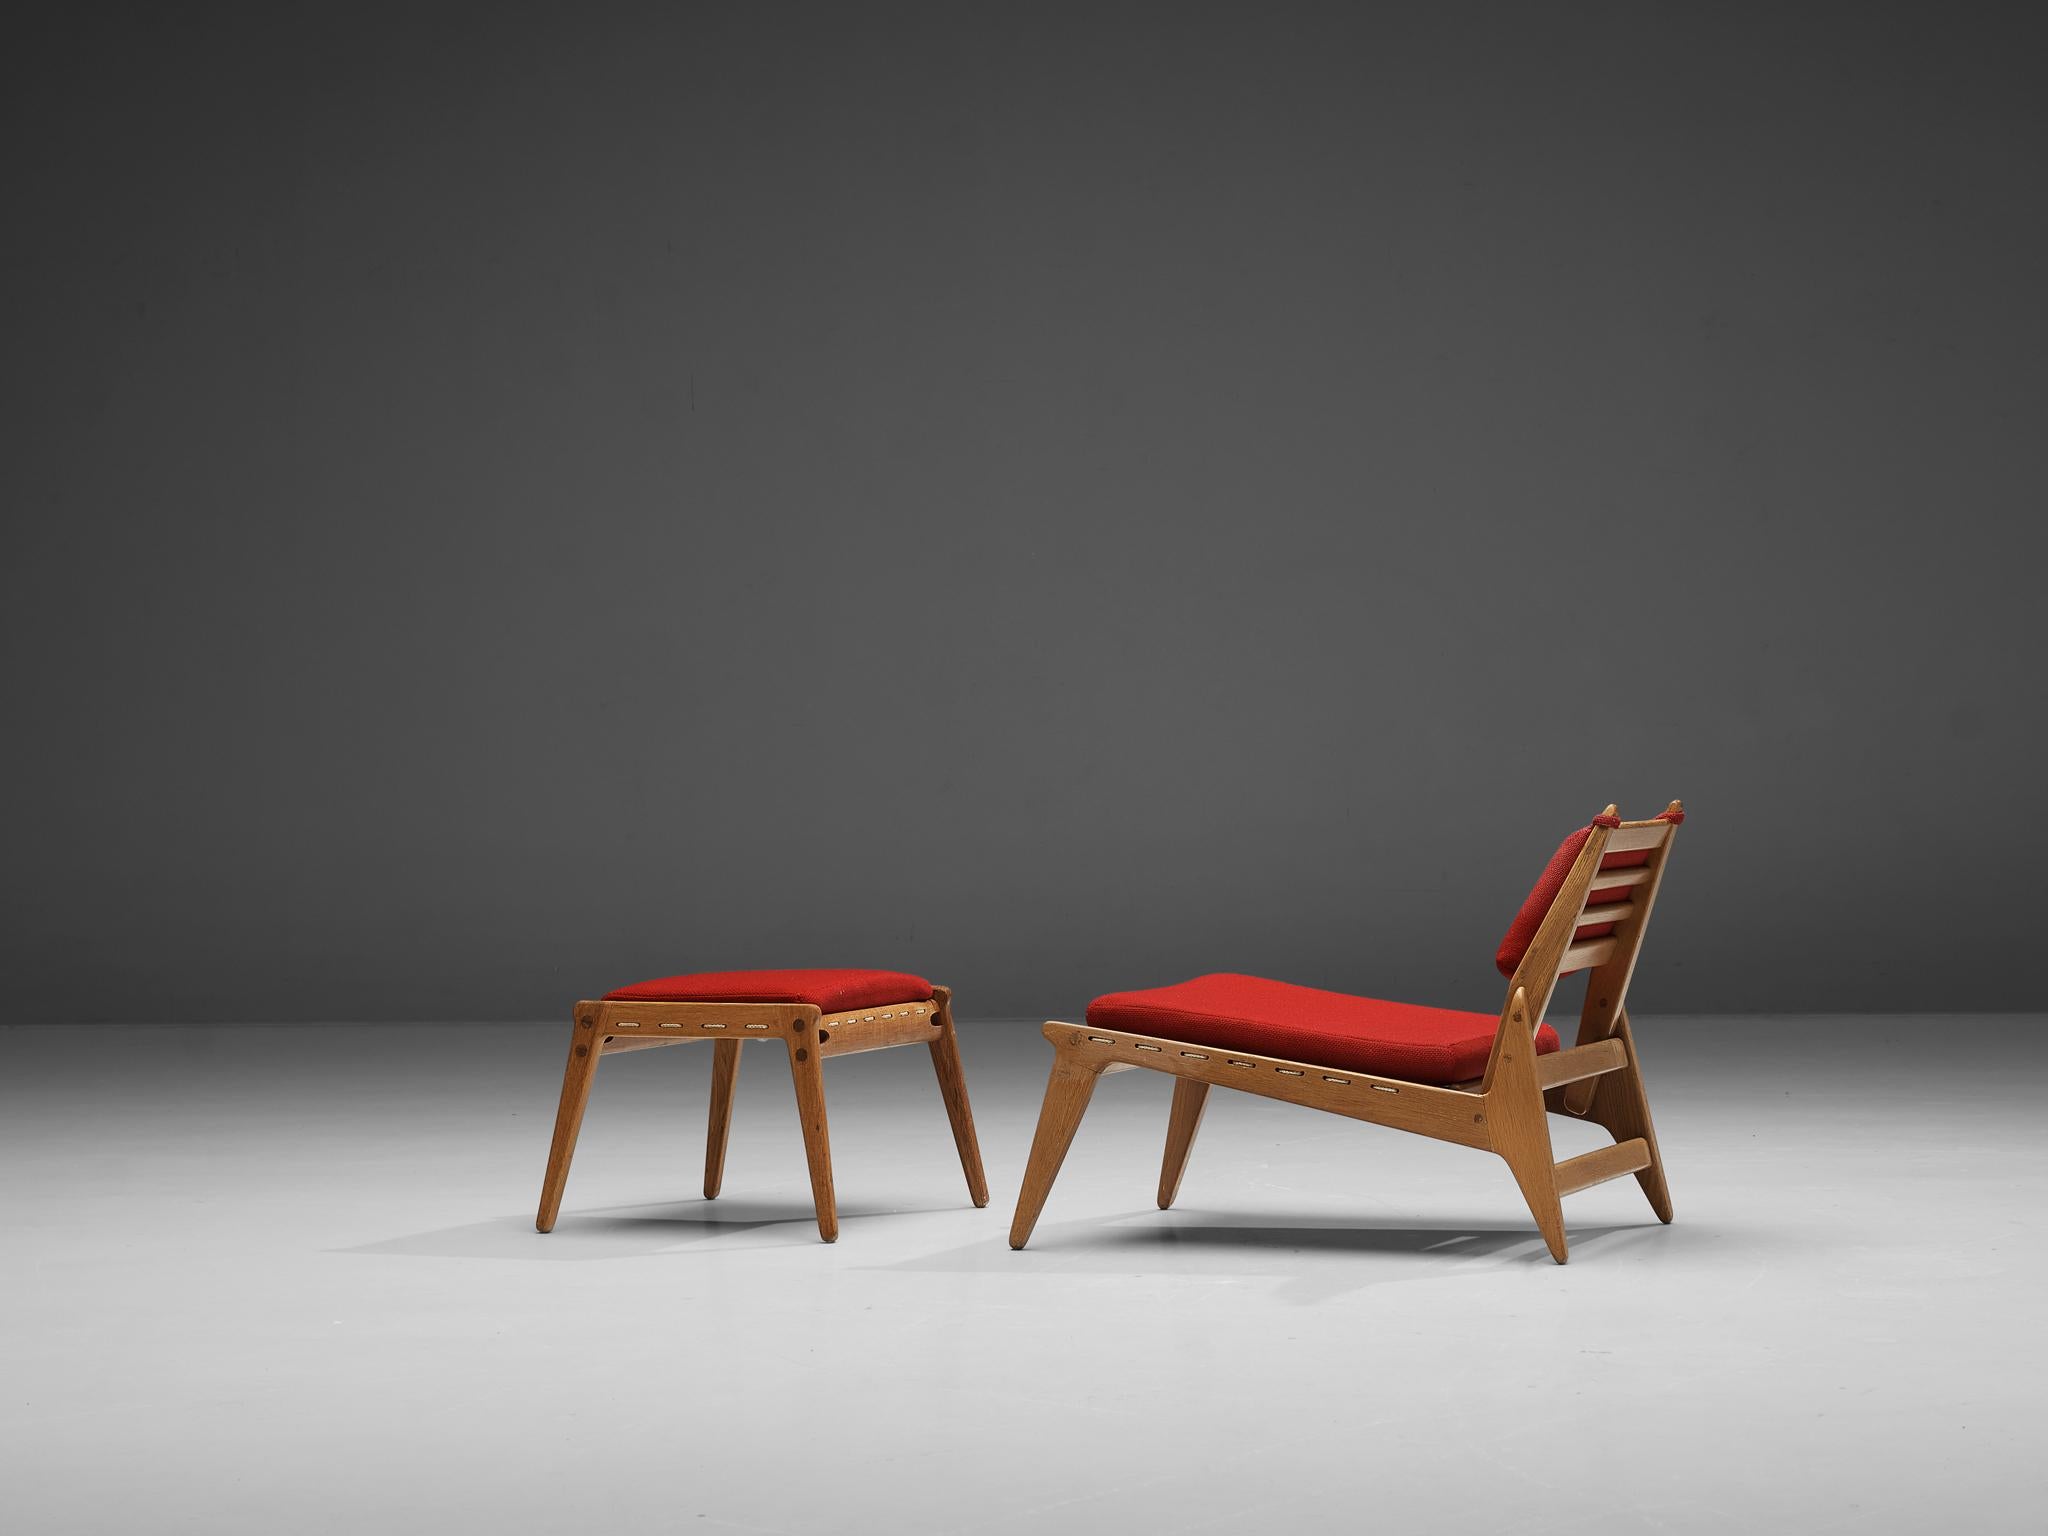 Hunting lounge chair with ottoman, oak, rope, fabric, Germany, 1960s

This relaxing chair shows a minimal design combined with great woodworking. An open character is created by the high legs and back. Besides the wood-joints the lace seating is